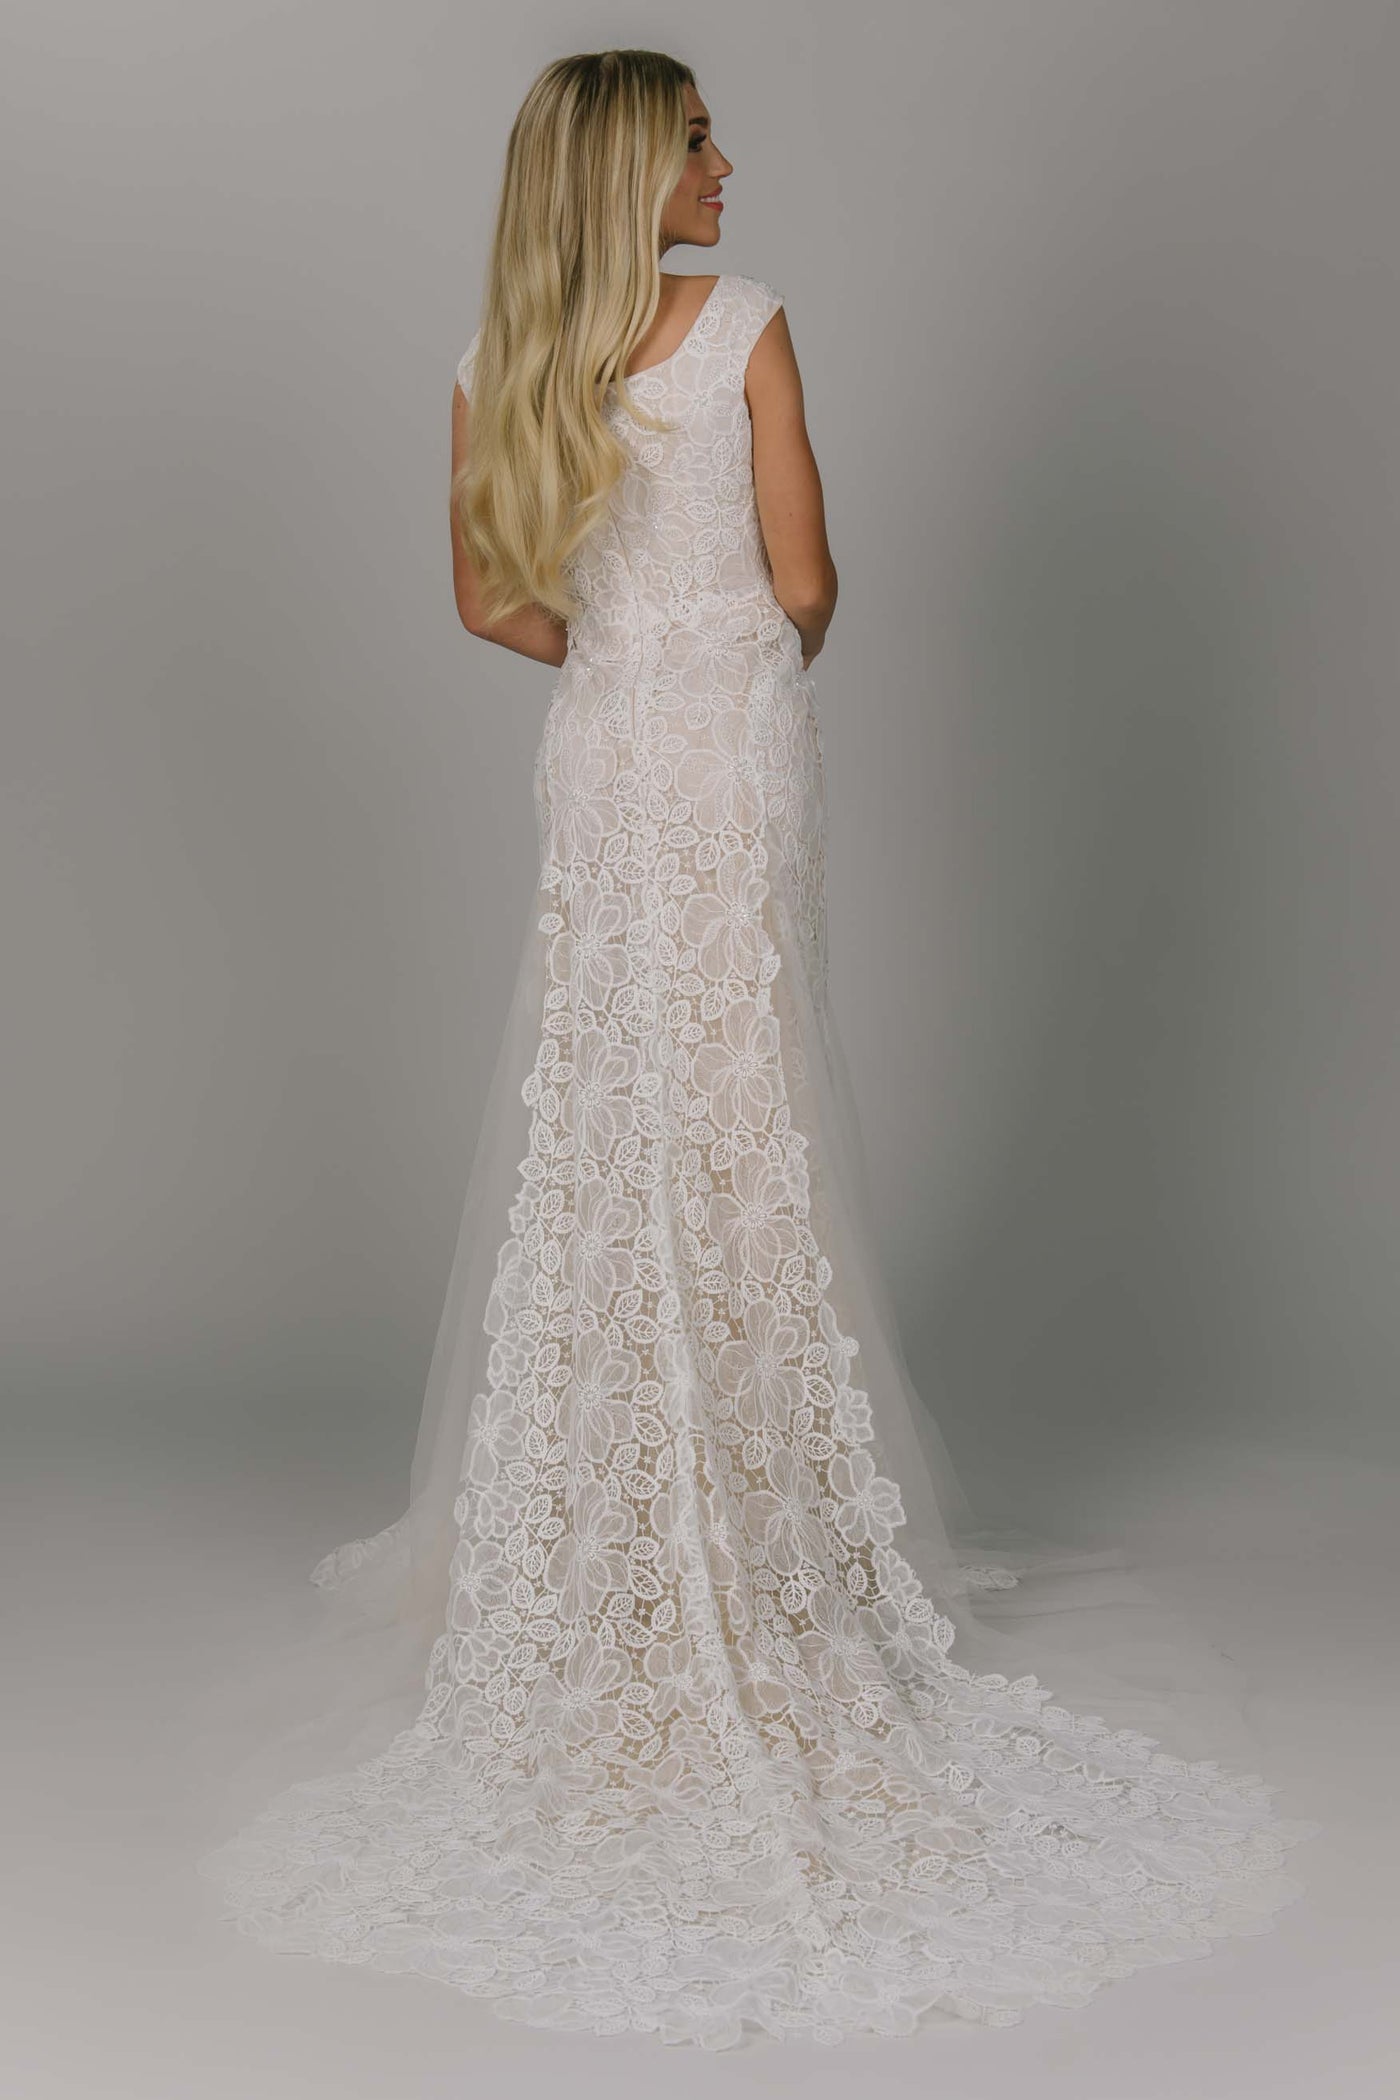 Fitted modest wedding dress featuring flower petal lace. It has a v-neckline and champagne underlay. It has cap sleeves and tulle slits. Absolutely stunning for any modest wedding dress bride.